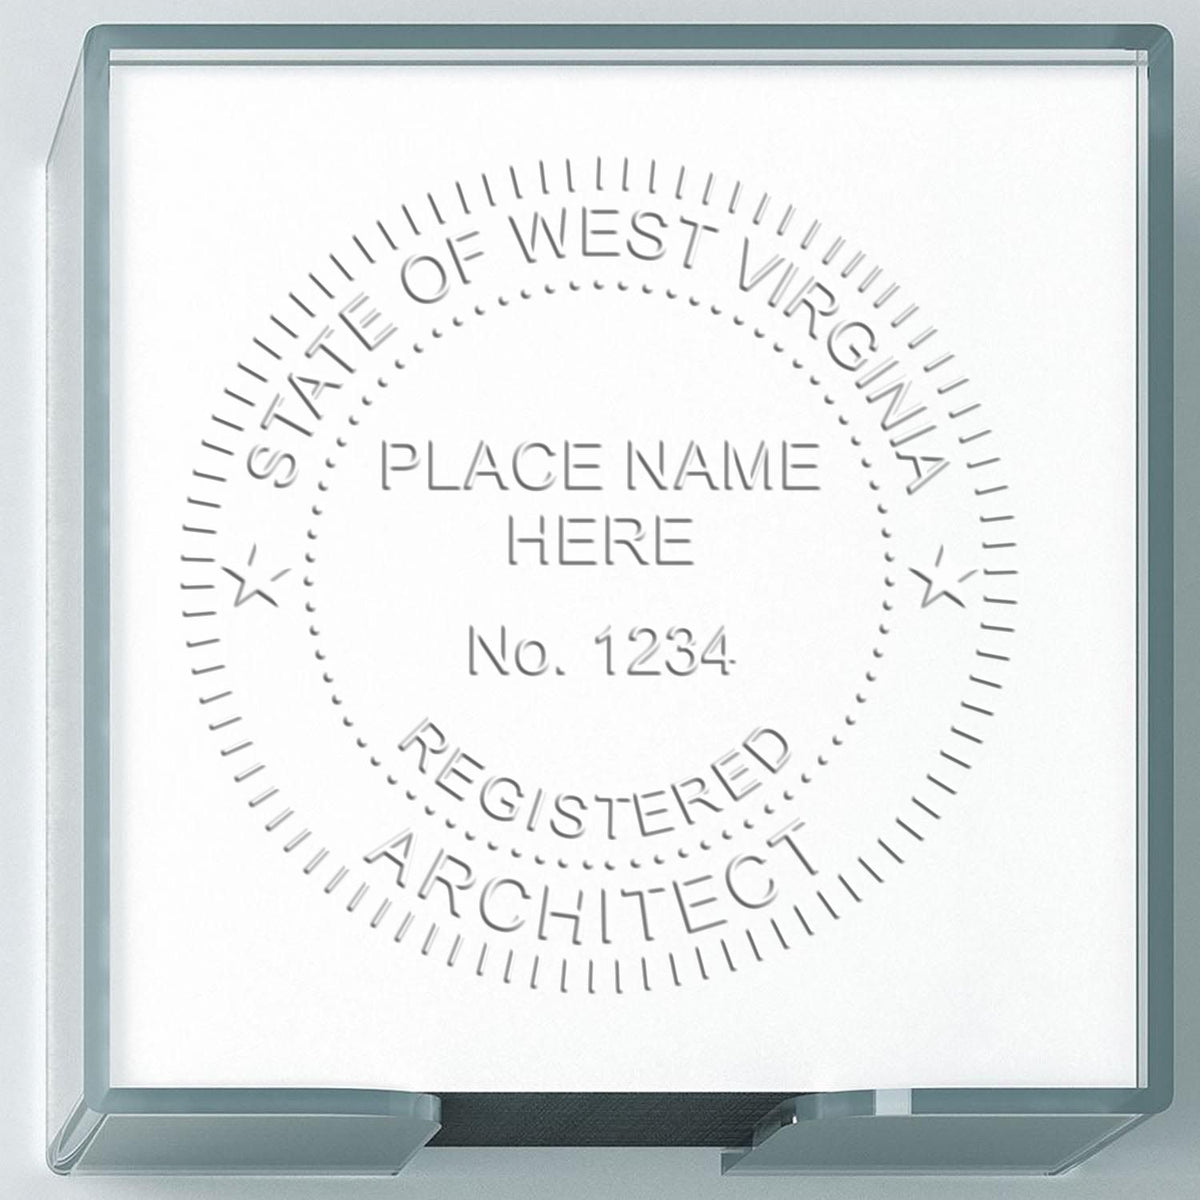 This paper is stamped with a sample imprint of the Extended Long Reach West Virginia Architect Seal Embosser, signifying its quality and reliability.